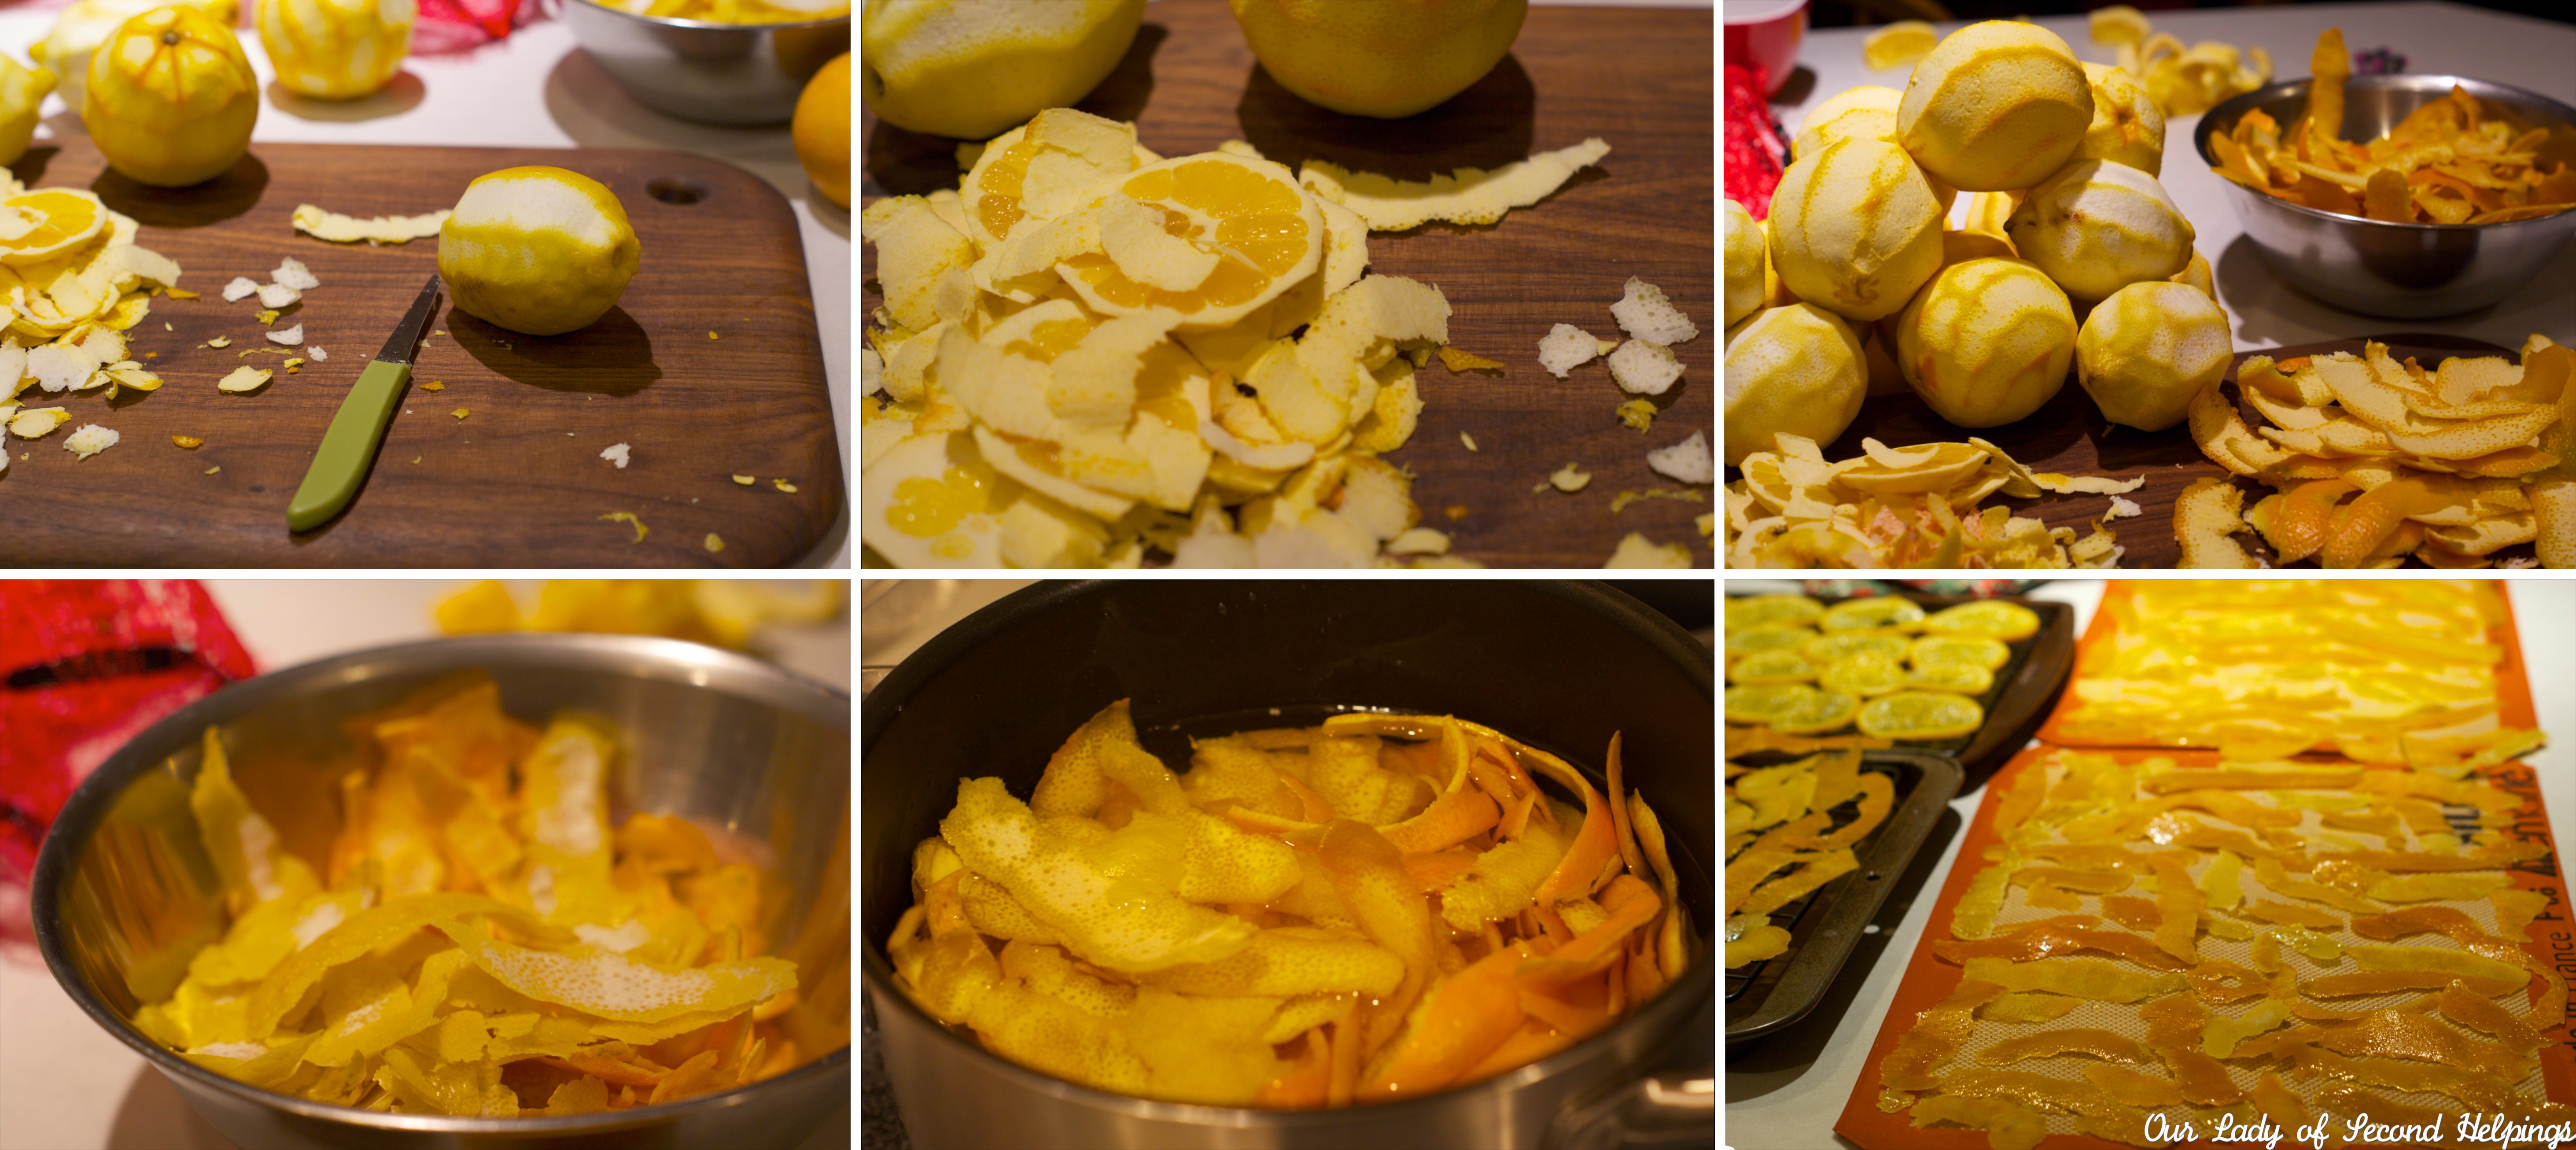 Making Candied Citrus Peels